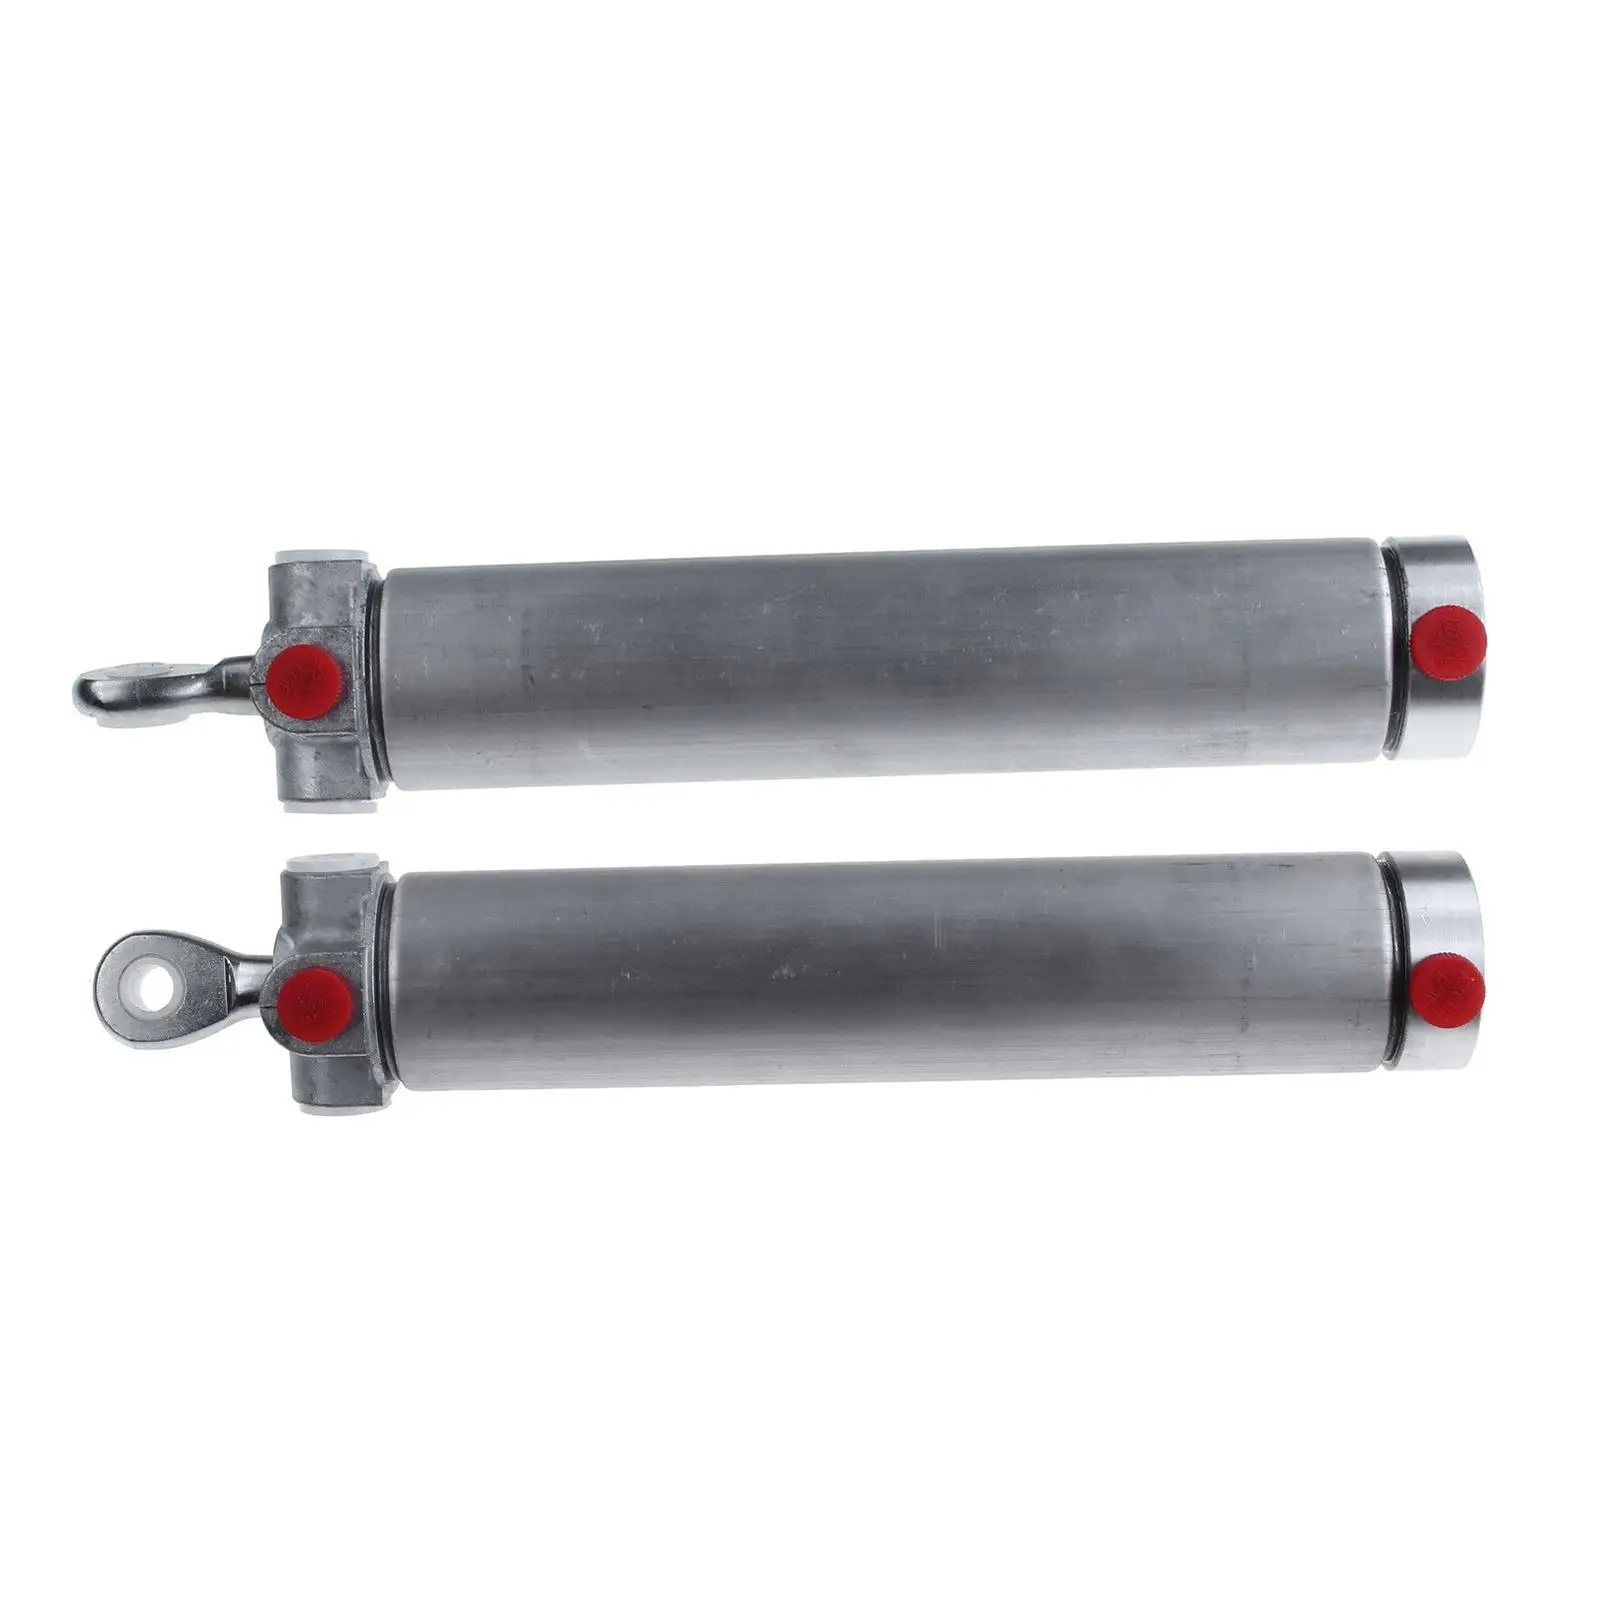 Vehicle Convertible Top Hydraulic Cylinders for Ford Mustang Accessory